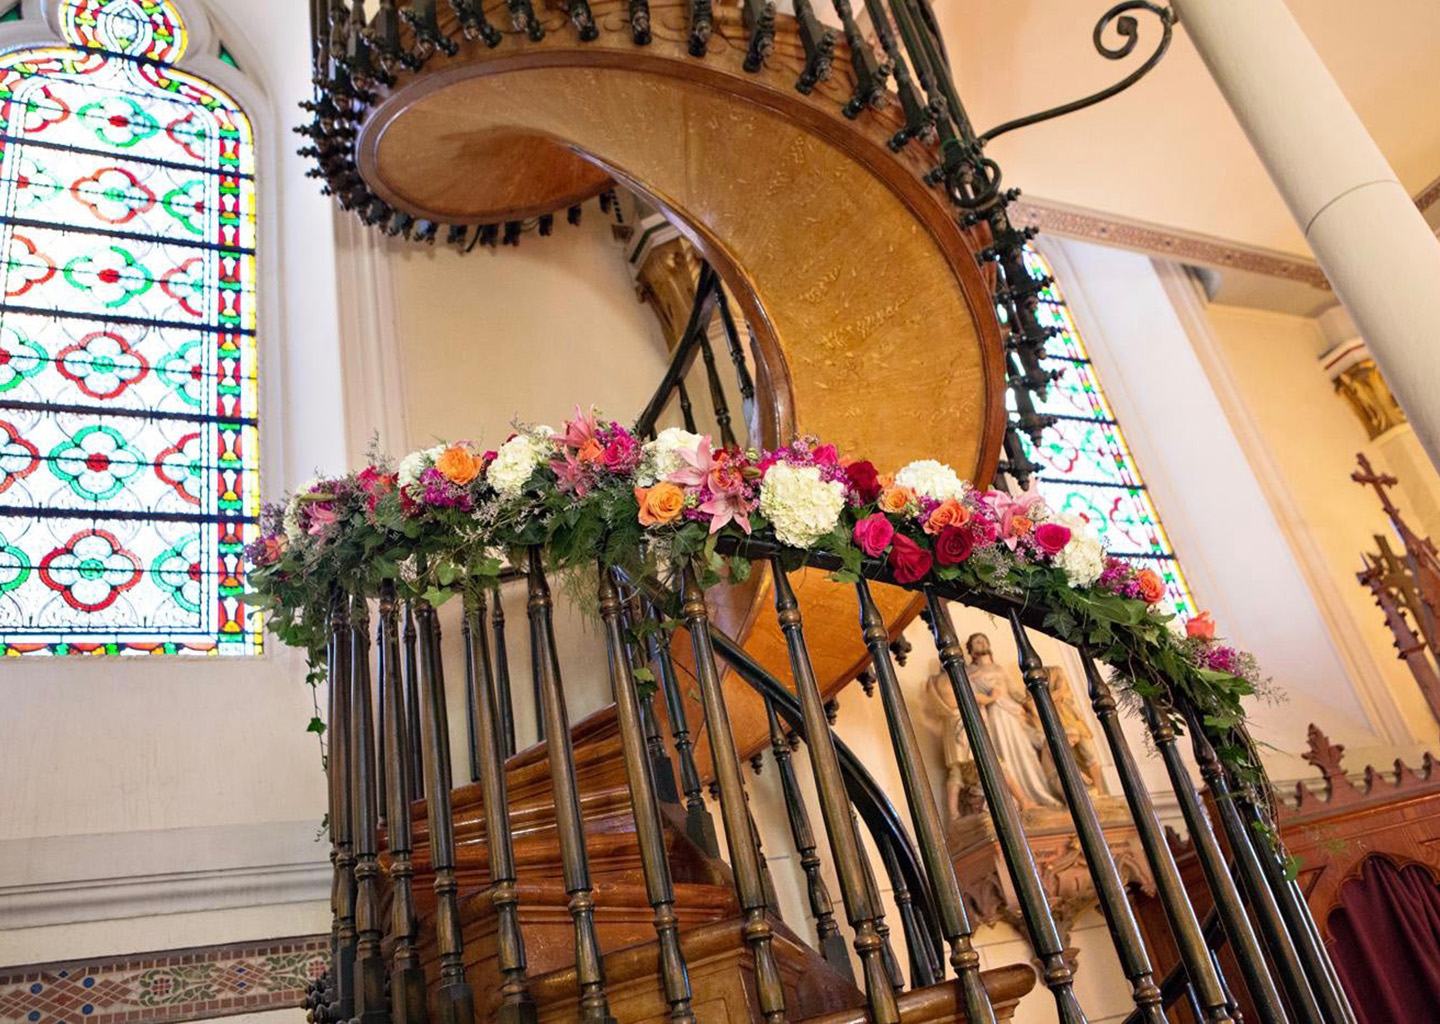 The miraculous stairs of Loretto Chapel